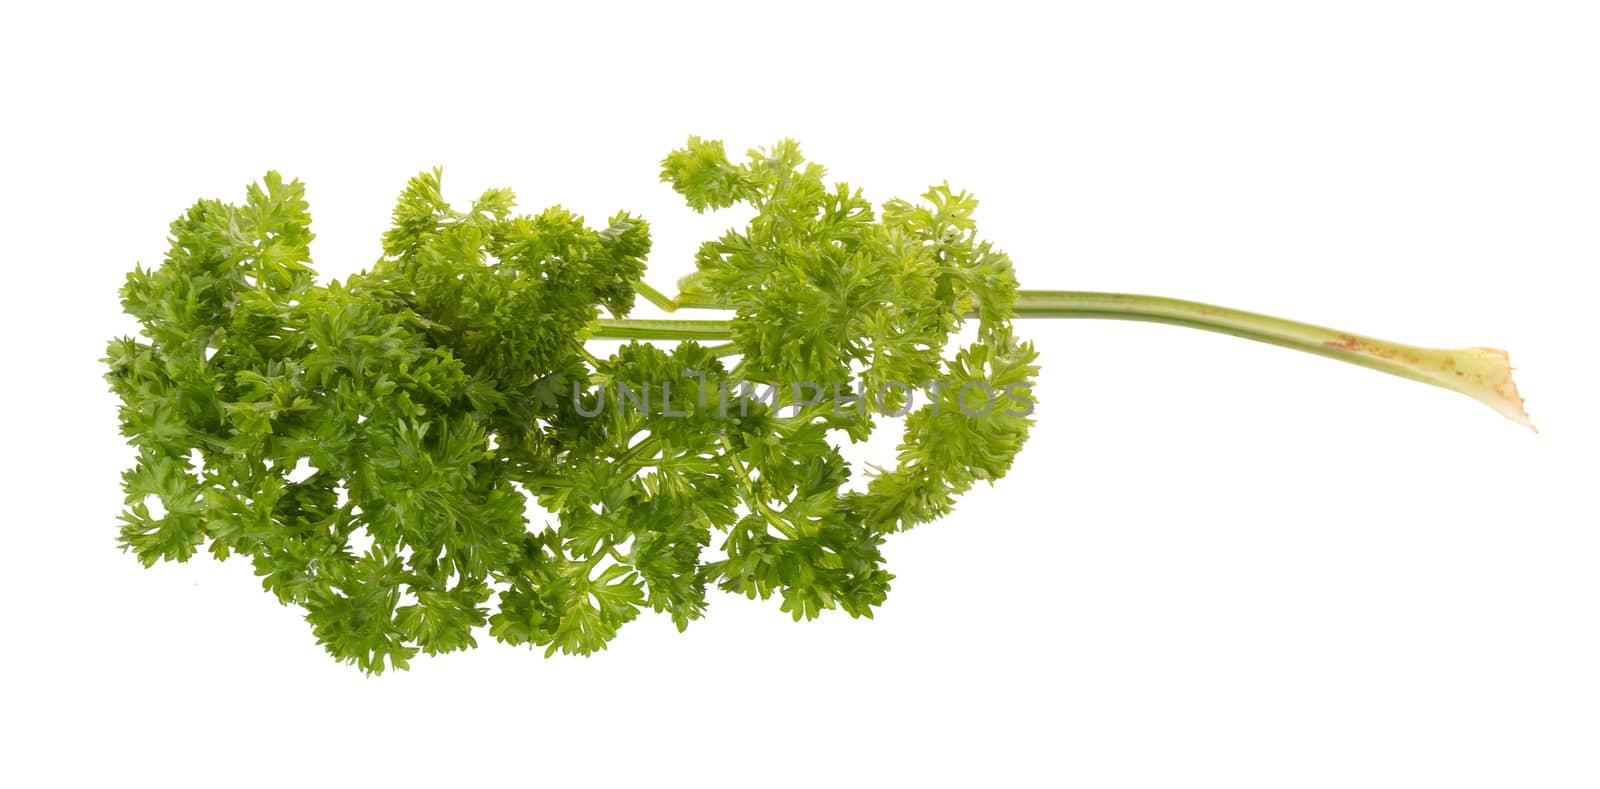 Green leaves of parsley isolated on white background by kaiskynet